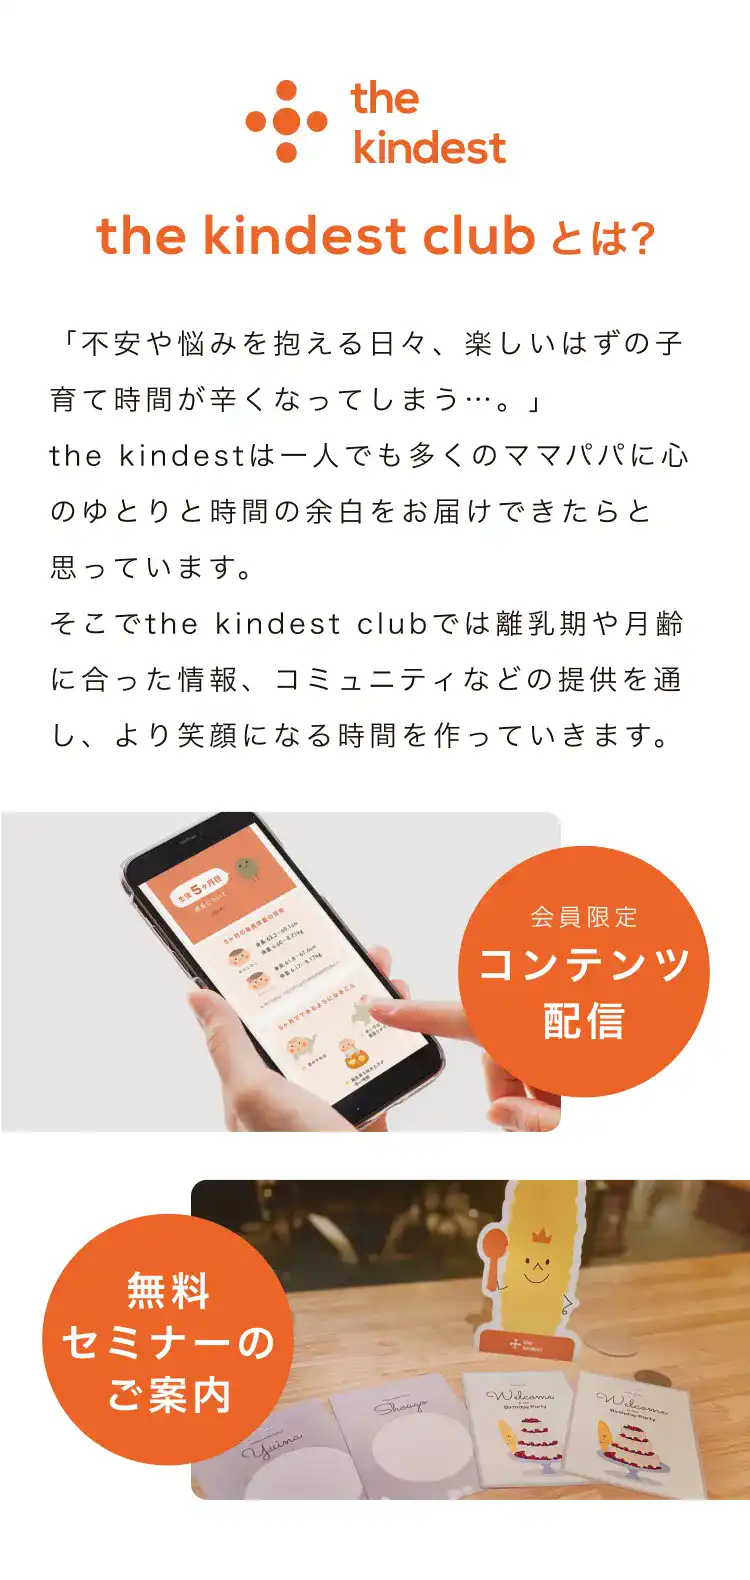 the kindest club とは